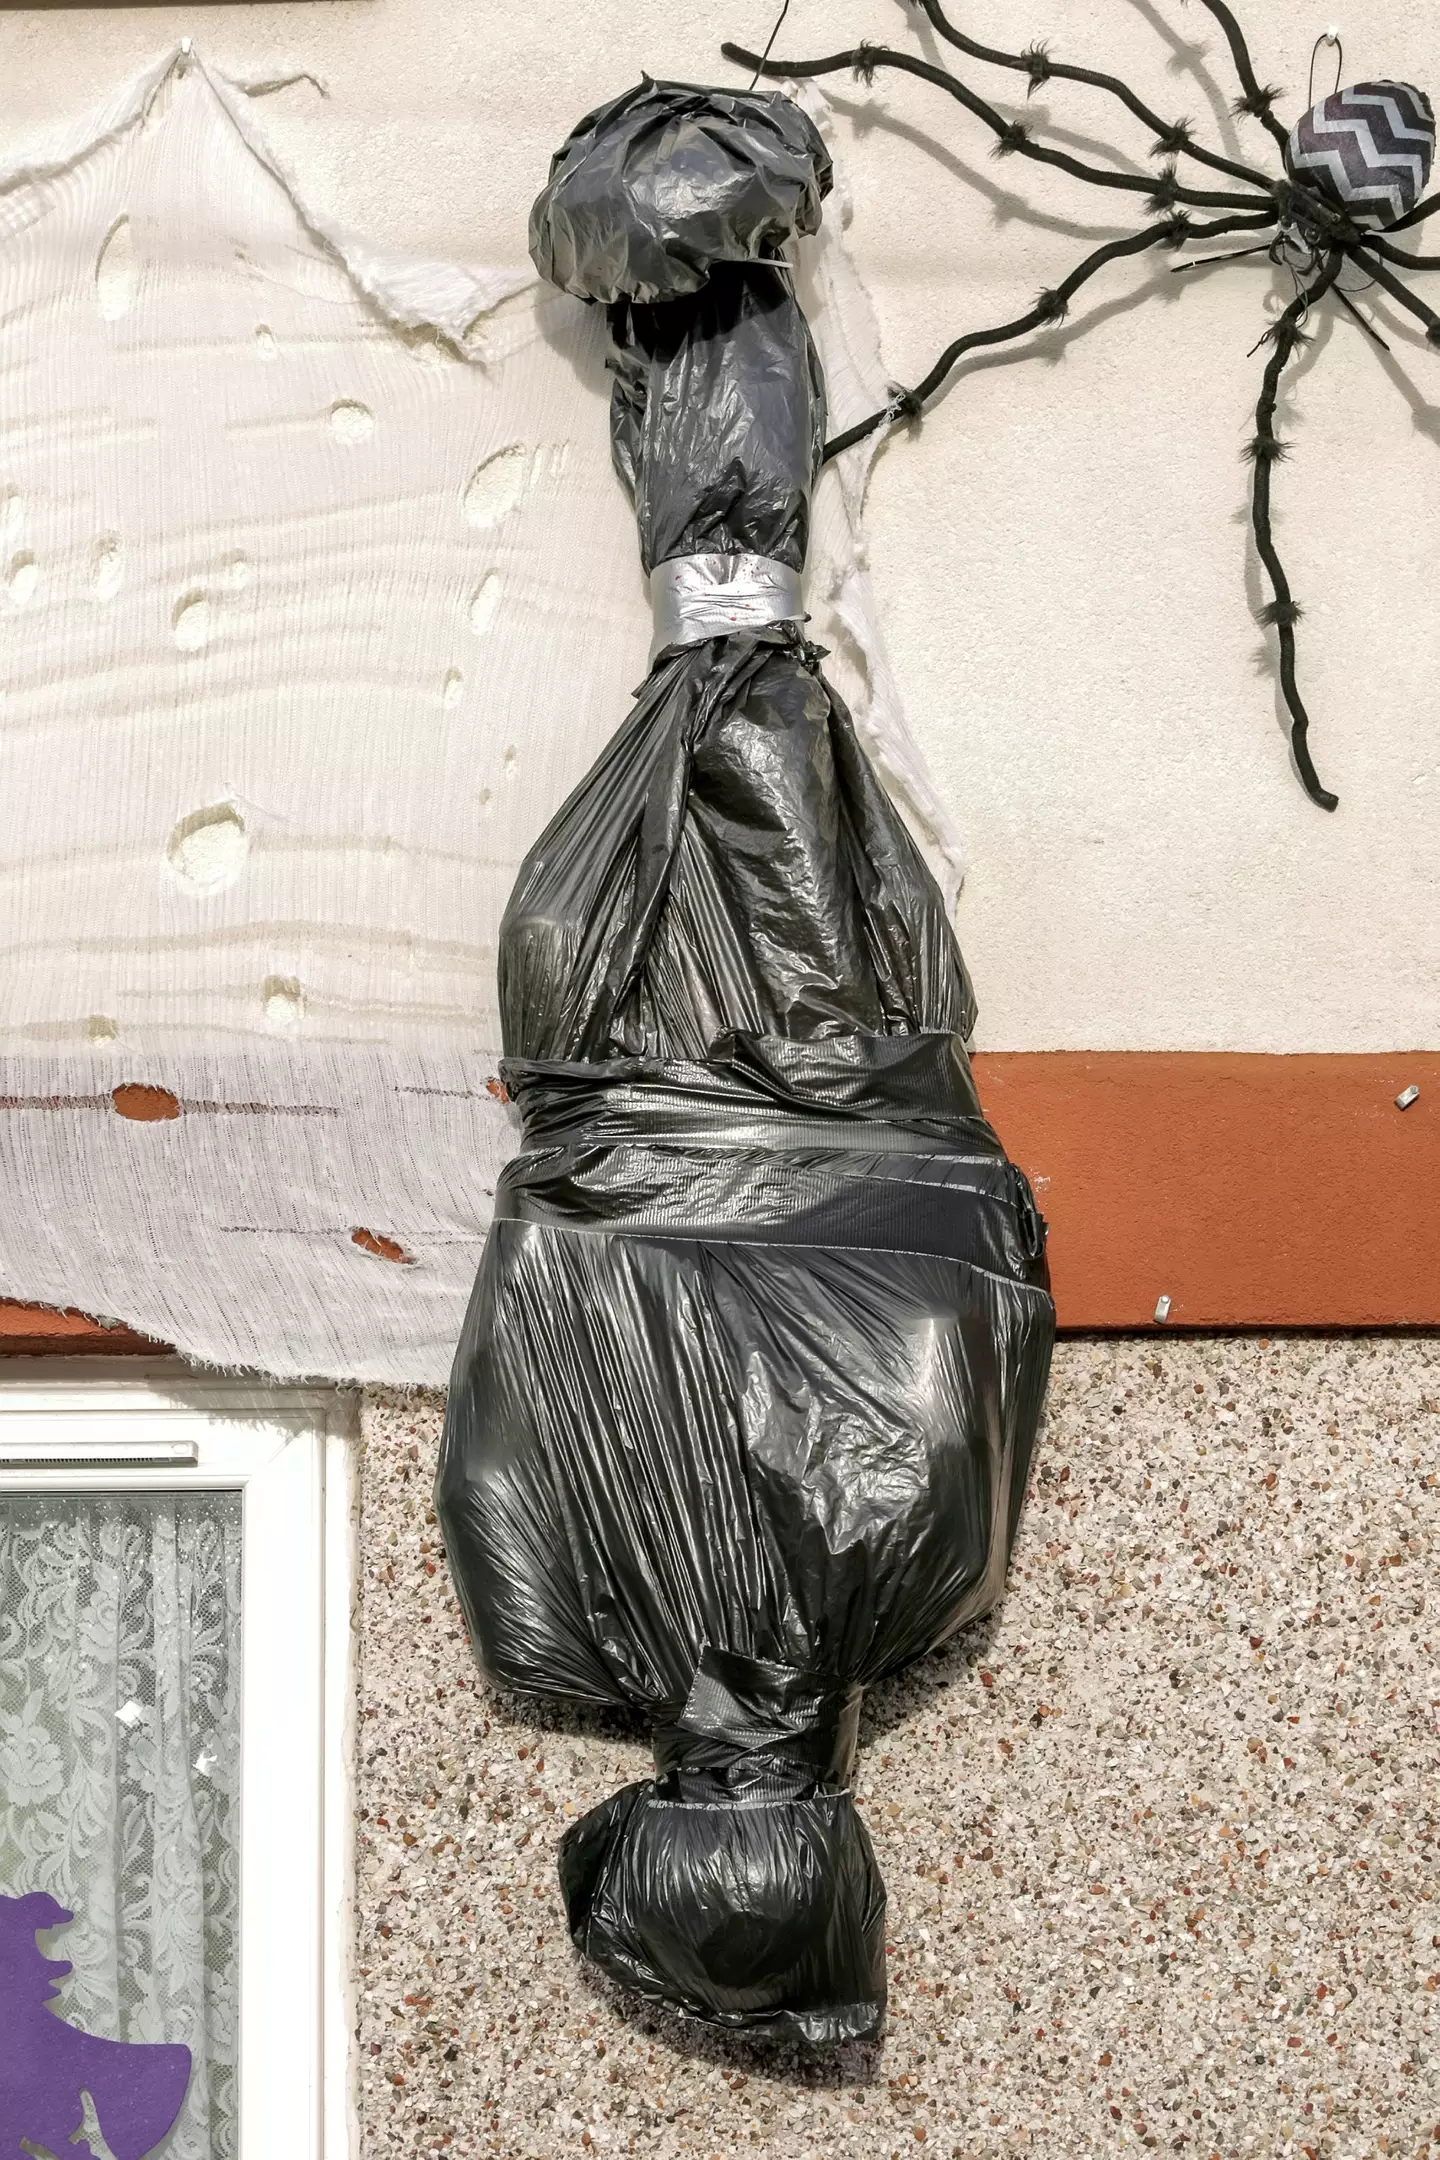 Neighbours aren't impressed with the body bags.